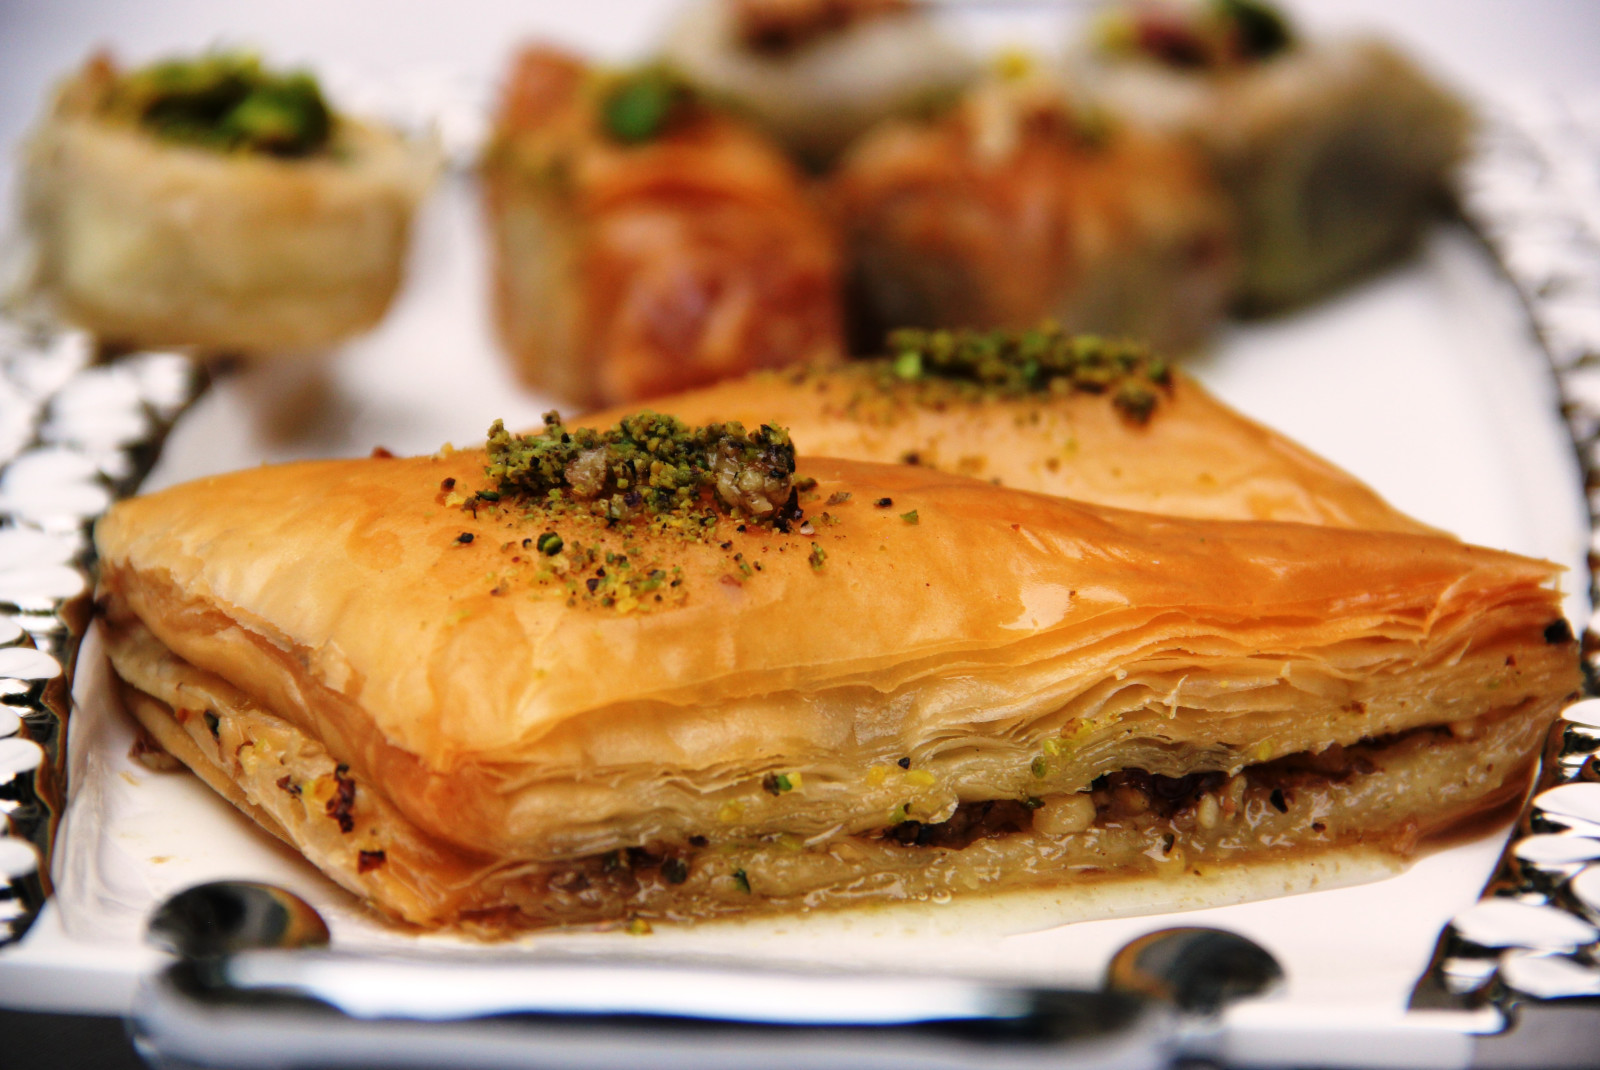 golden layered baklava pastry with pistachio crumbs on a white plate with a black lining and metal handles 